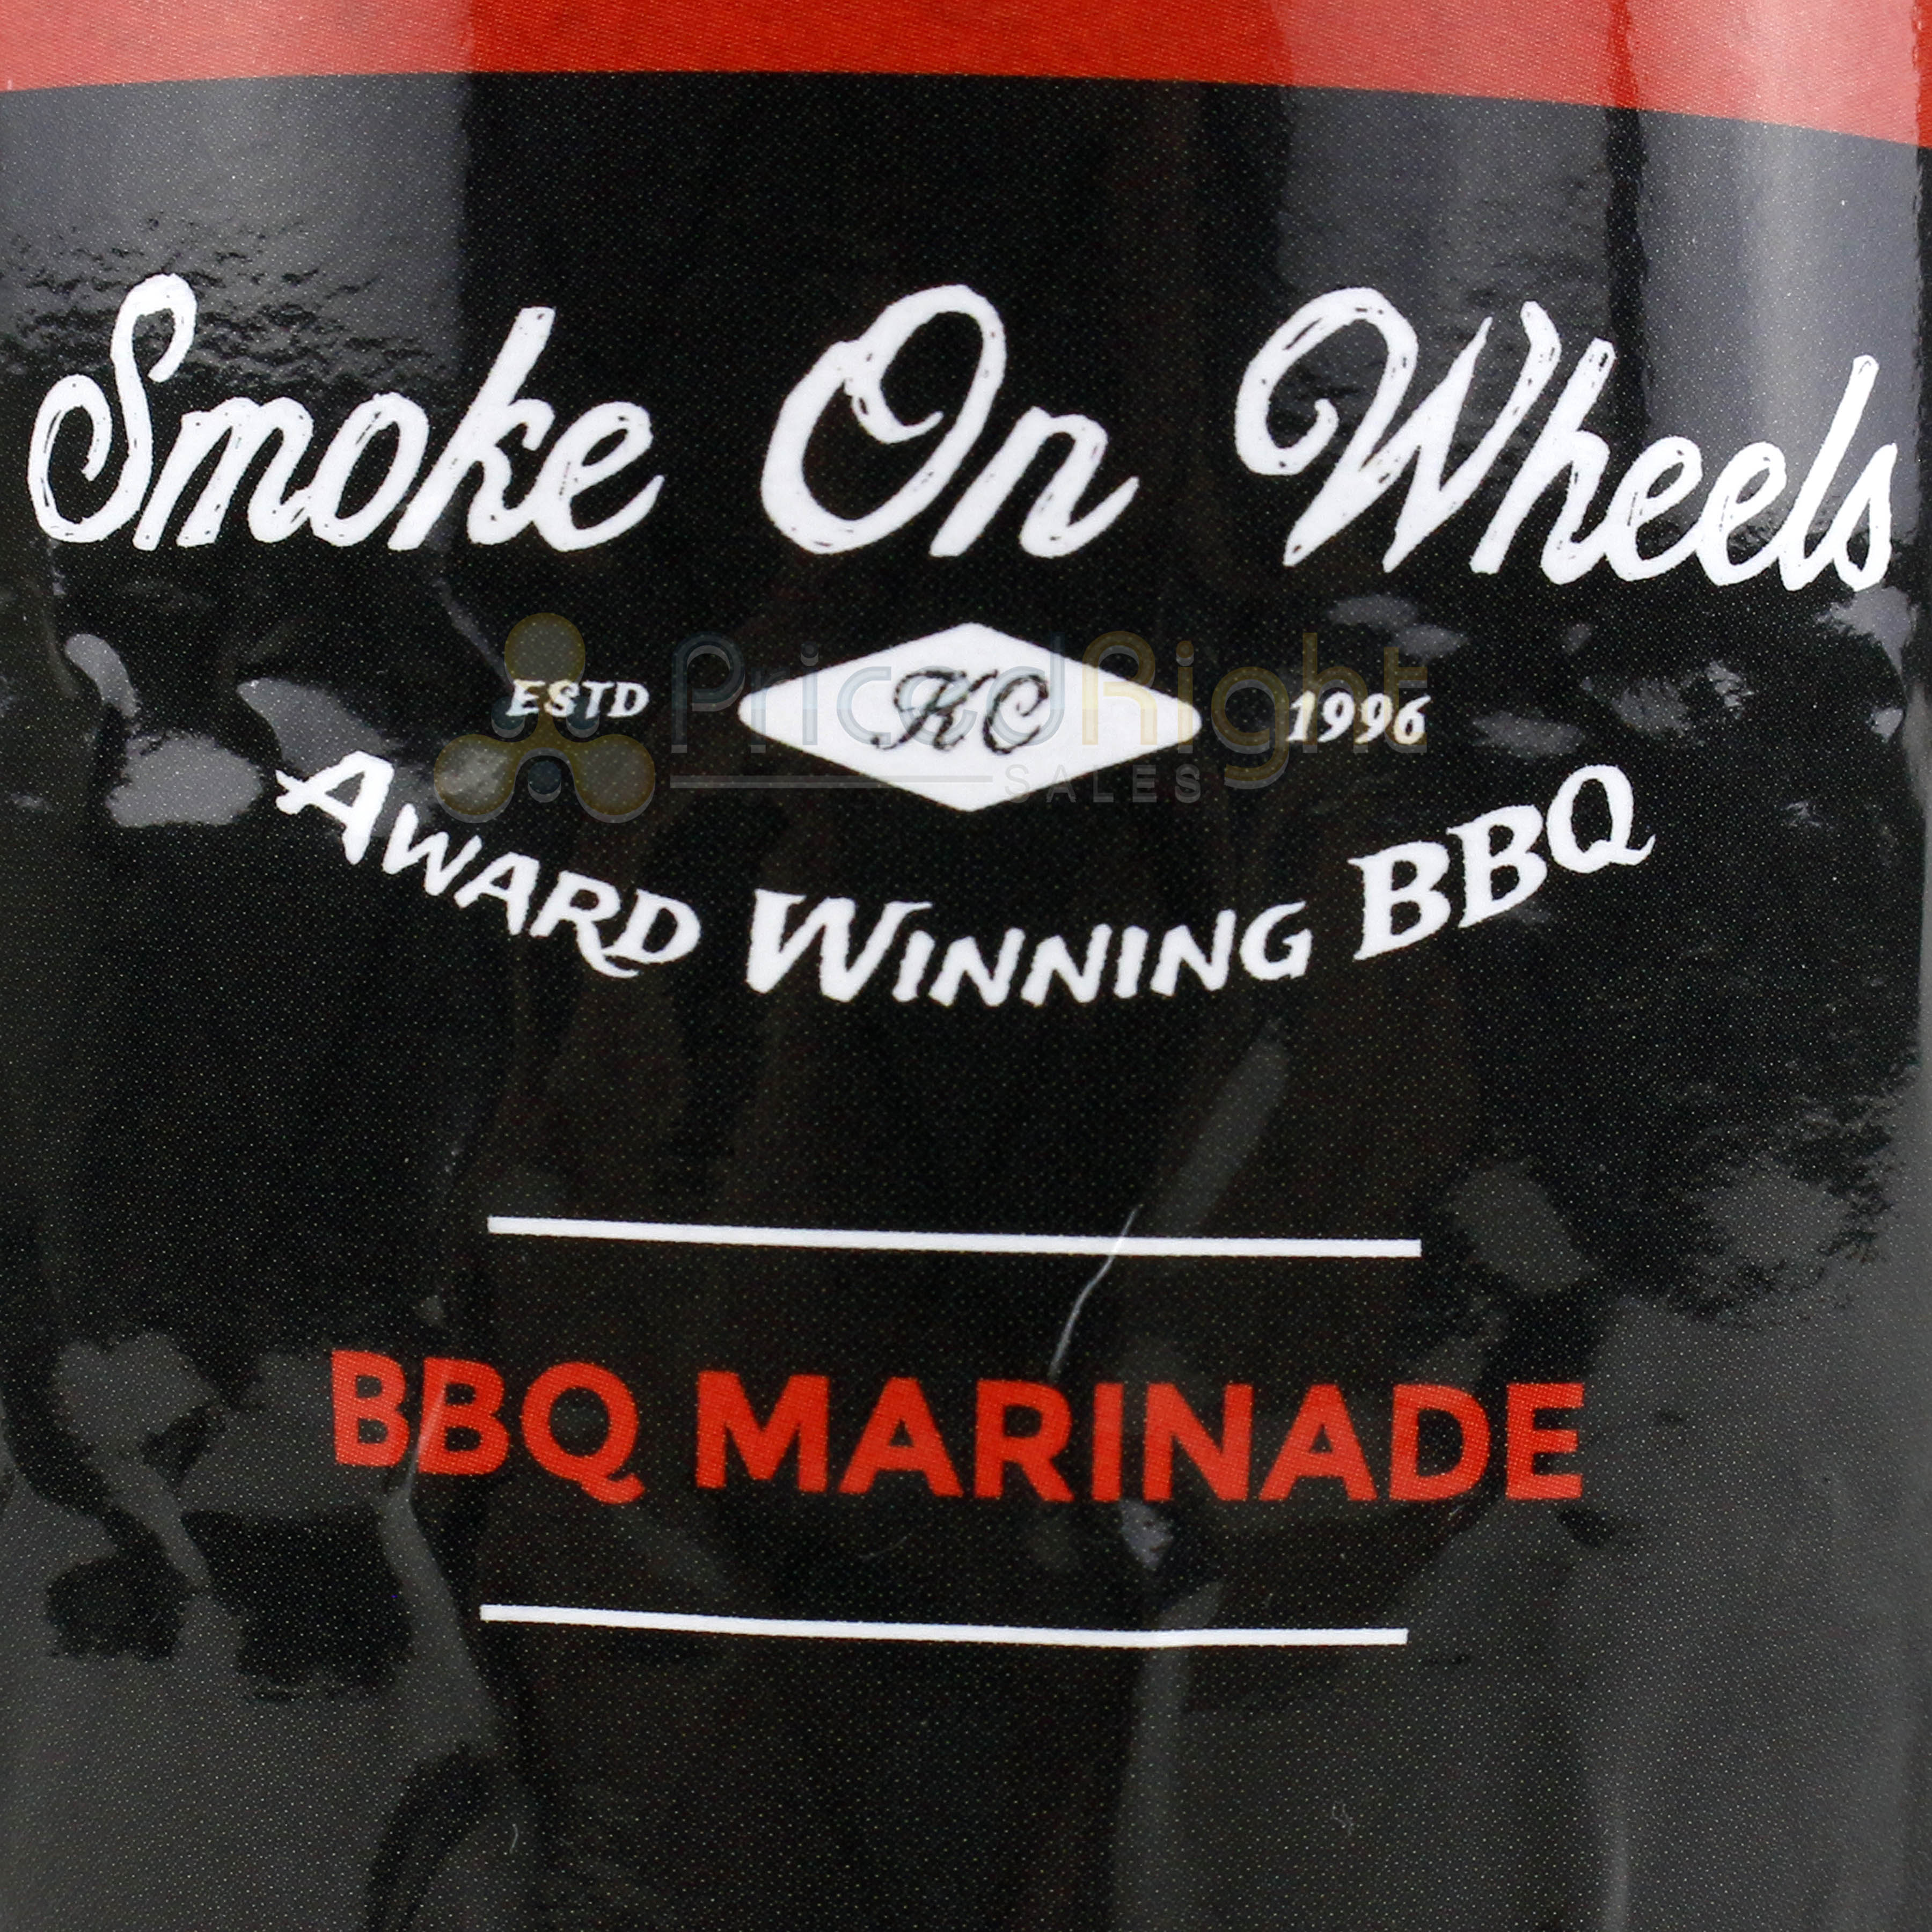 Smoke on Wheels 16oz Pork and BBQ Marinade Gluten Msg Free Competition Rated